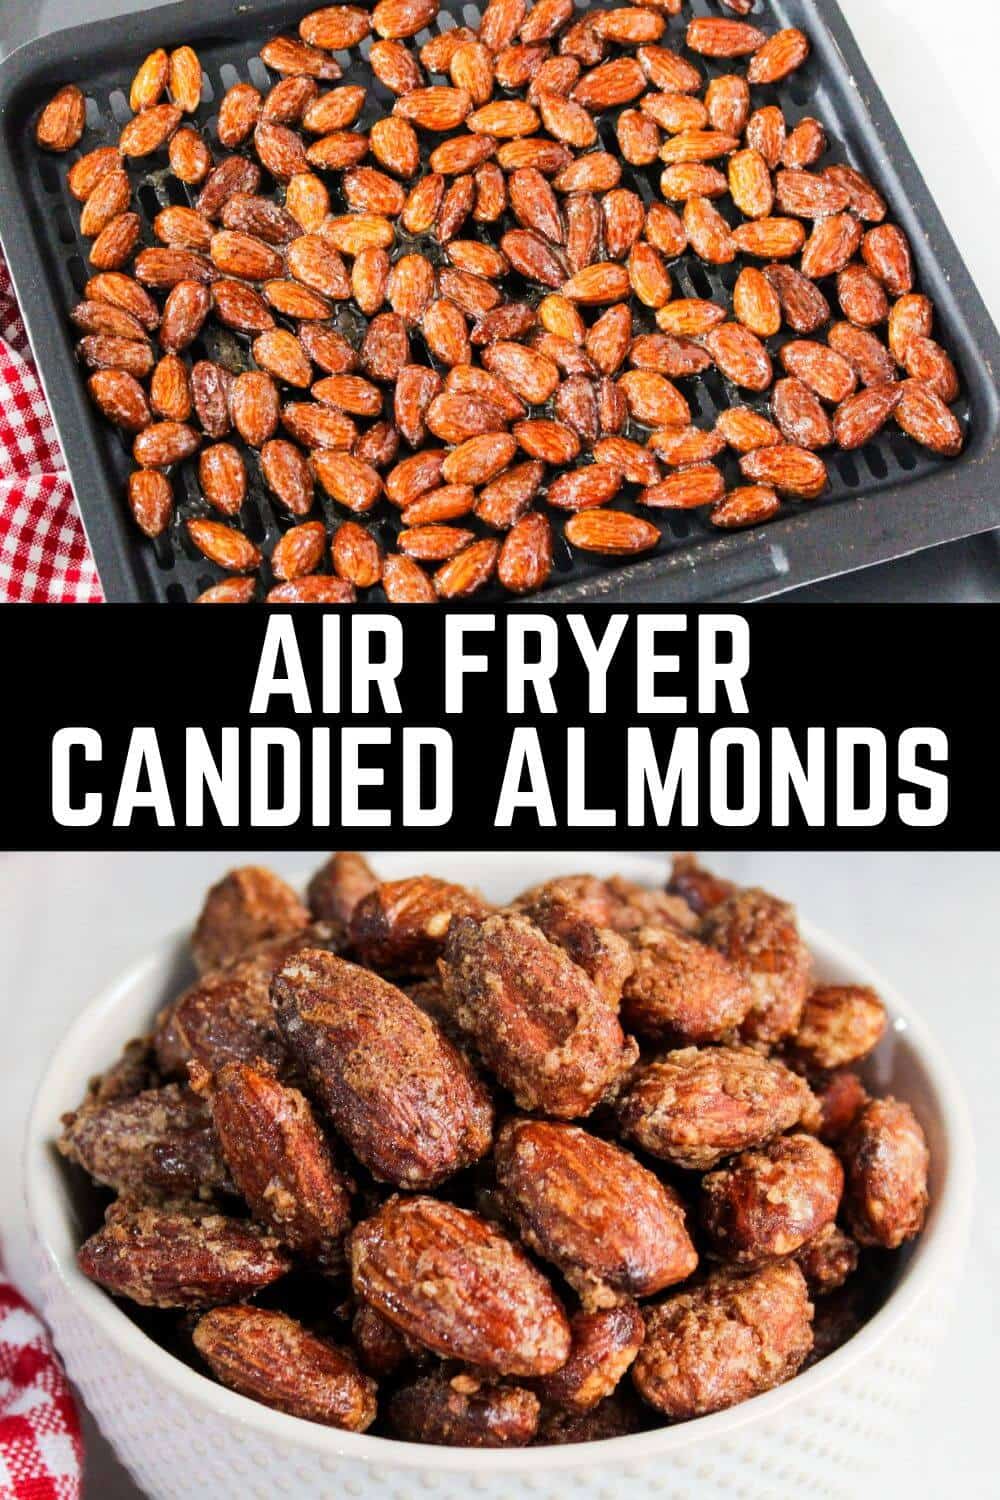 Air fryer candied almonds are a delightful treat made by air frying almonds with a sweet and crunchy coating.